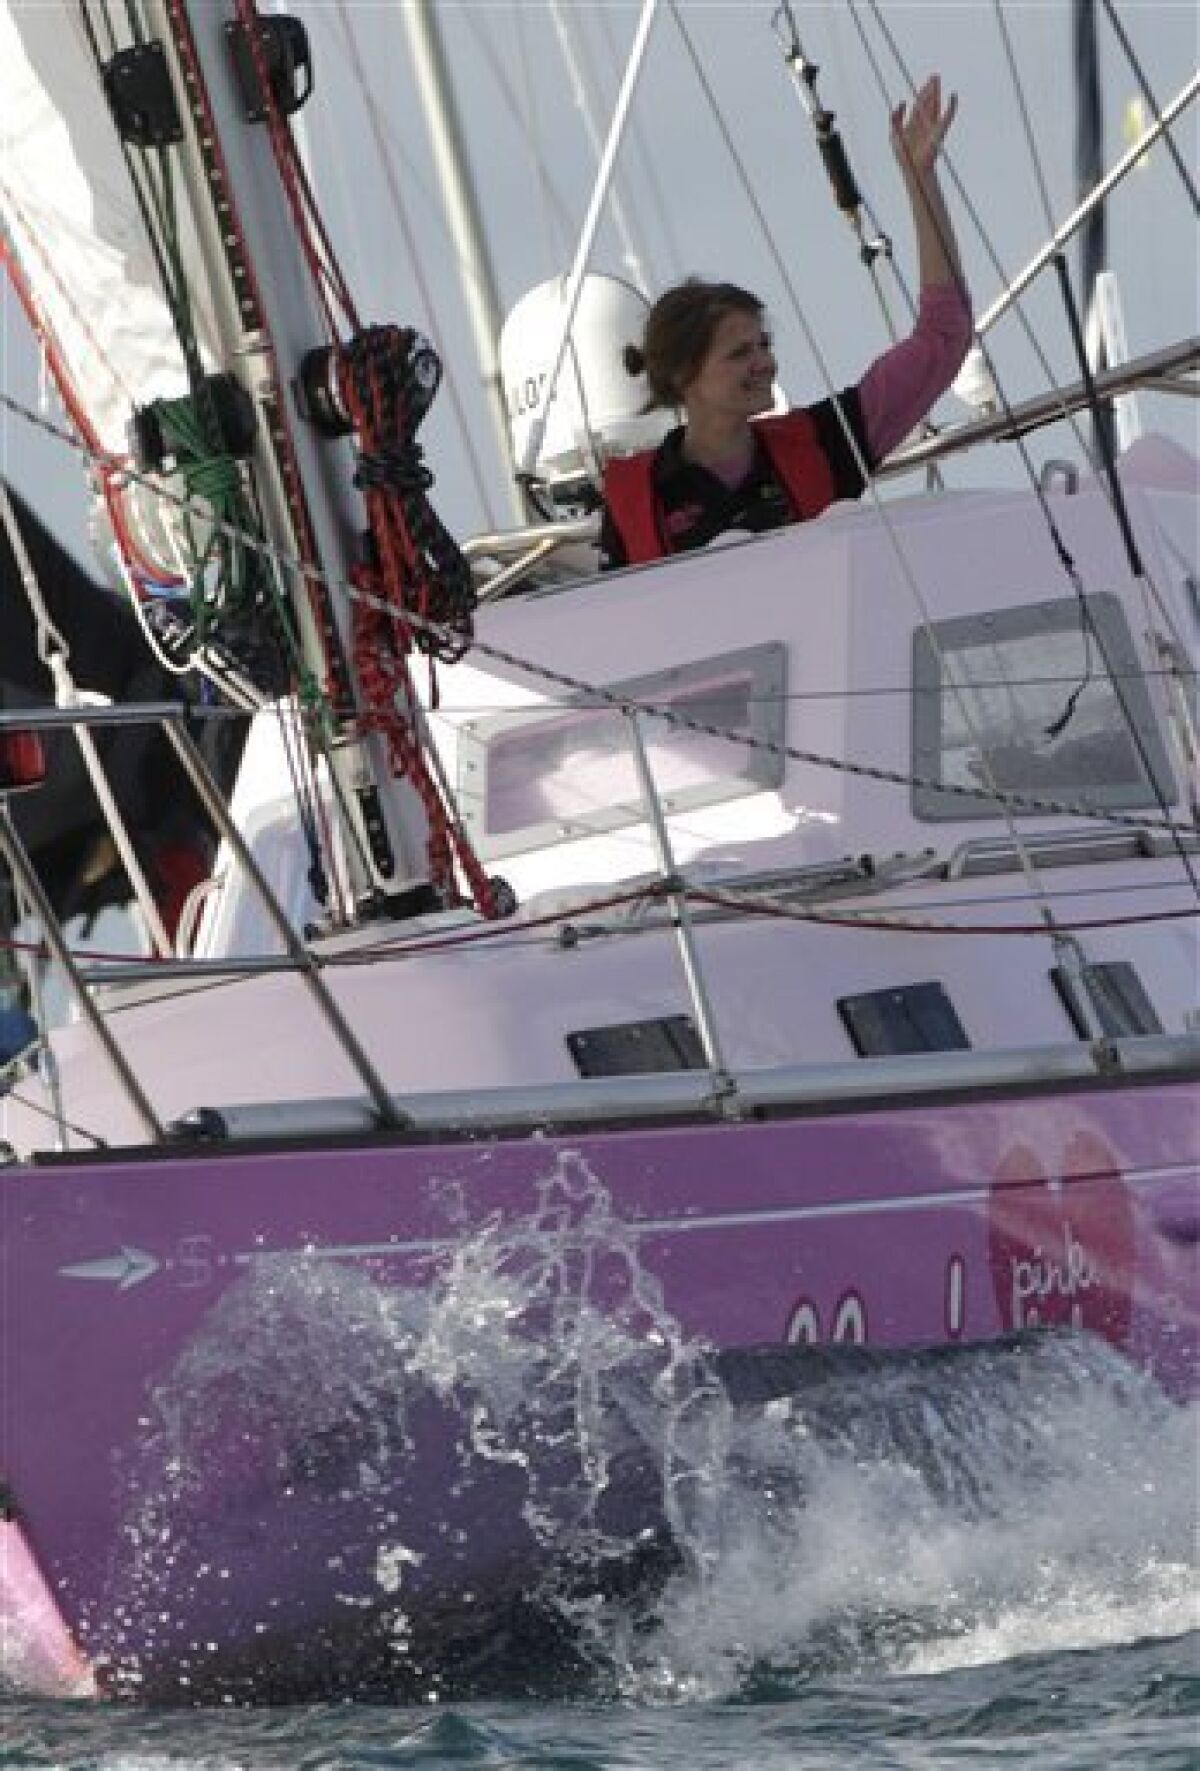 Sixteen-year-old Jessica Watson waves as she sails past the finish line at the entrance to Sydney Harbour in Sydney, Australia, Saturday, May 15, 2010, capping off a nearly 23,000 nautical miles voyage. Watson crossed the finish line of her round-the-world journey Saturday, becoming the youngest person to sail solo, nonstop and unassisted around the world. (AP Photo/Rob Griffith)